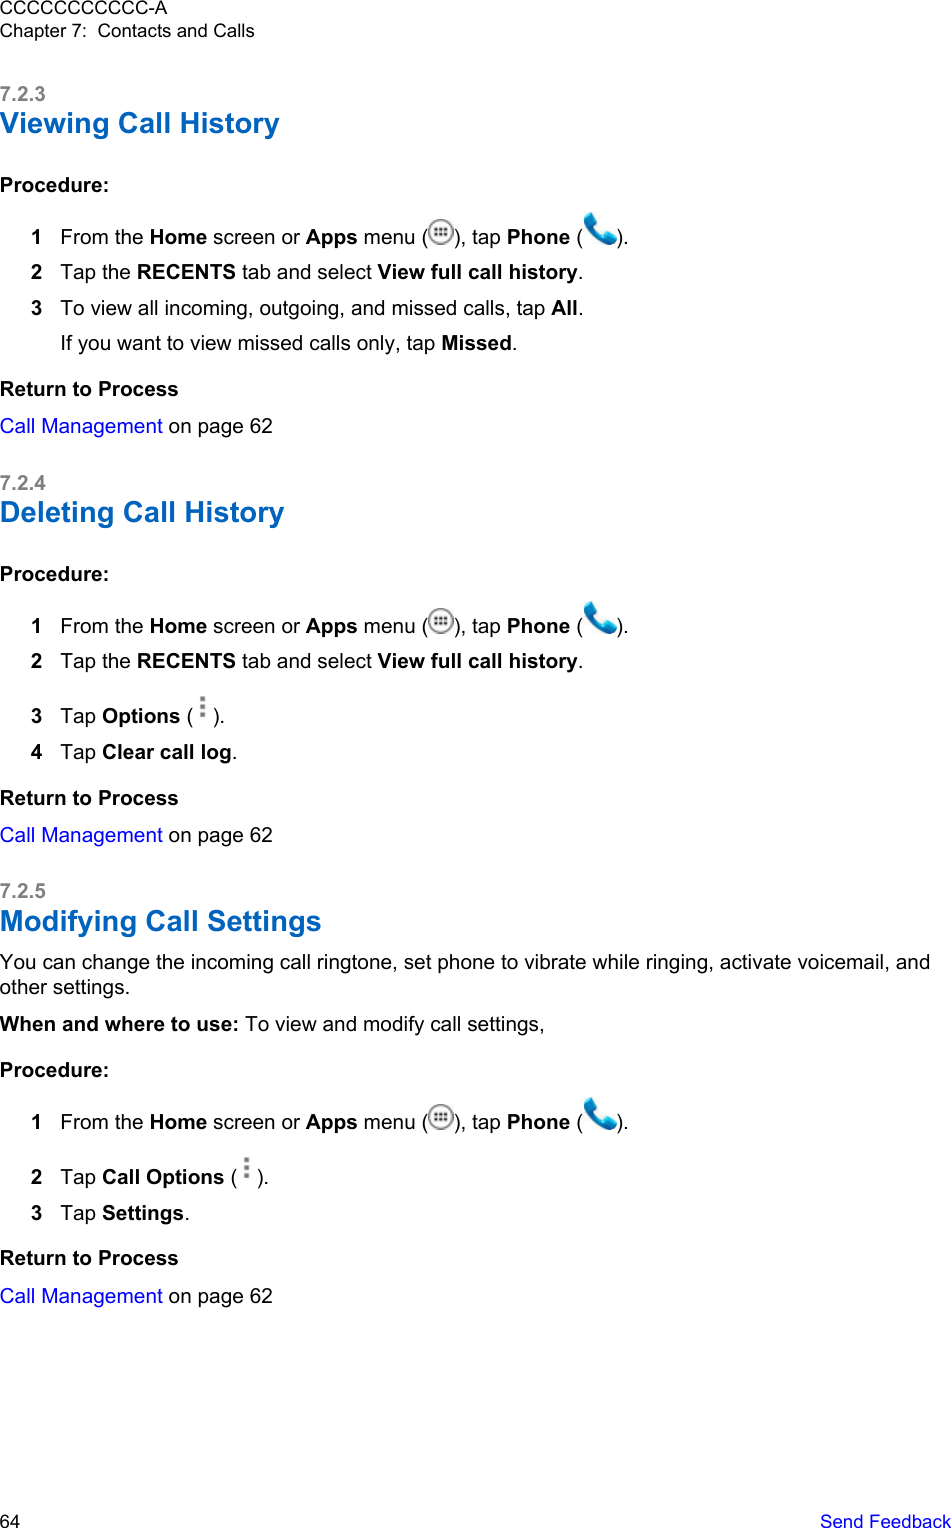 7.2.3Viewing Call HistoryProcedure:1From the Home screen or Apps menu ( ), tap Phone ( ).2Tap the RECENTS tab and select View full call history.3To view all incoming, outgoing, and missed calls, tap All.If you want to view missed calls only, tap Missed.Return to ProcessCall Management on page 627.2.4Deleting Call HistoryProcedure:1From the Home screen or Apps menu ( ), tap Phone ( ).2Tap the RECENTS tab and select View full call history.3Tap Options ( ).4Tap Clear call log.Return to ProcessCall Management on page 627.2.5Modifying Call Settings You can change the incoming call ringtone, set phone to vibrate while ringing, activate voicemail, andother settings.When and where to use: To view and modify call settings,Procedure:1From the Home screen or Apps menu ( ), tap Phone ( ).2Tap Call Options ( ).3Tap Settings.Return to ProcessCall Management on page 62CCCCCCCCCCC-AChapter 7:  Contacts and Calls64   Send Feedback